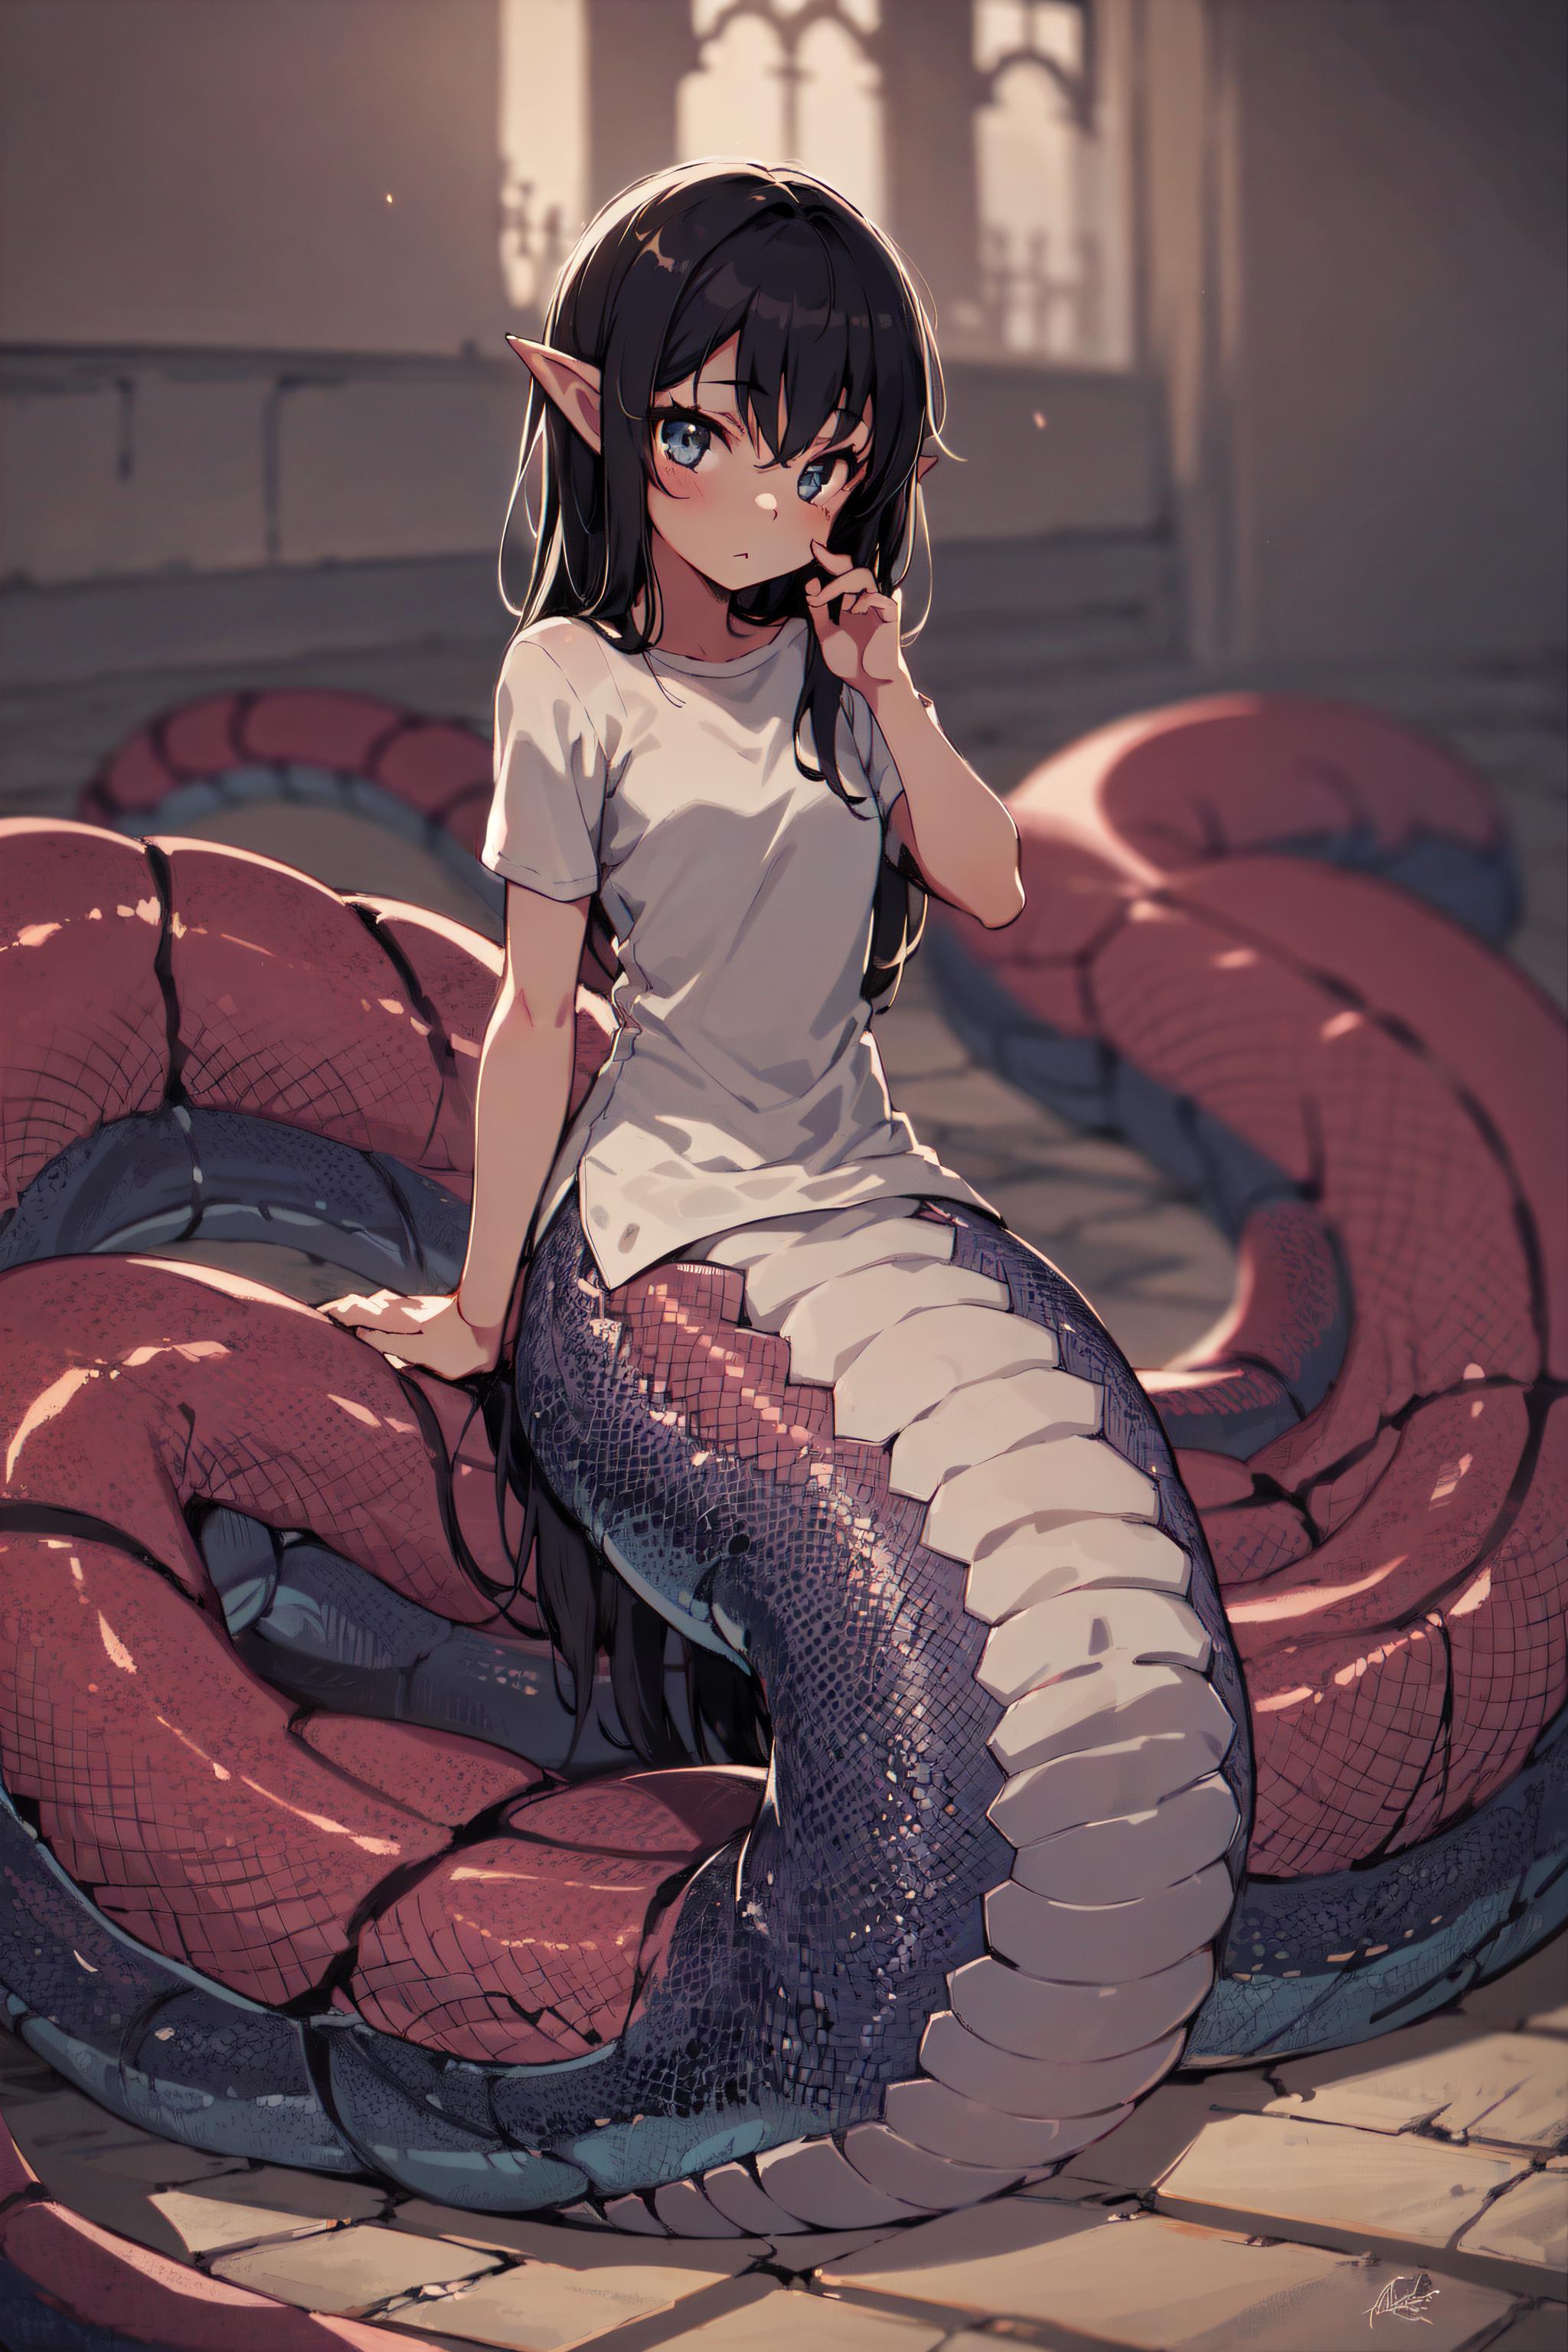 A girl with a mermaid tail sitting on a snake.